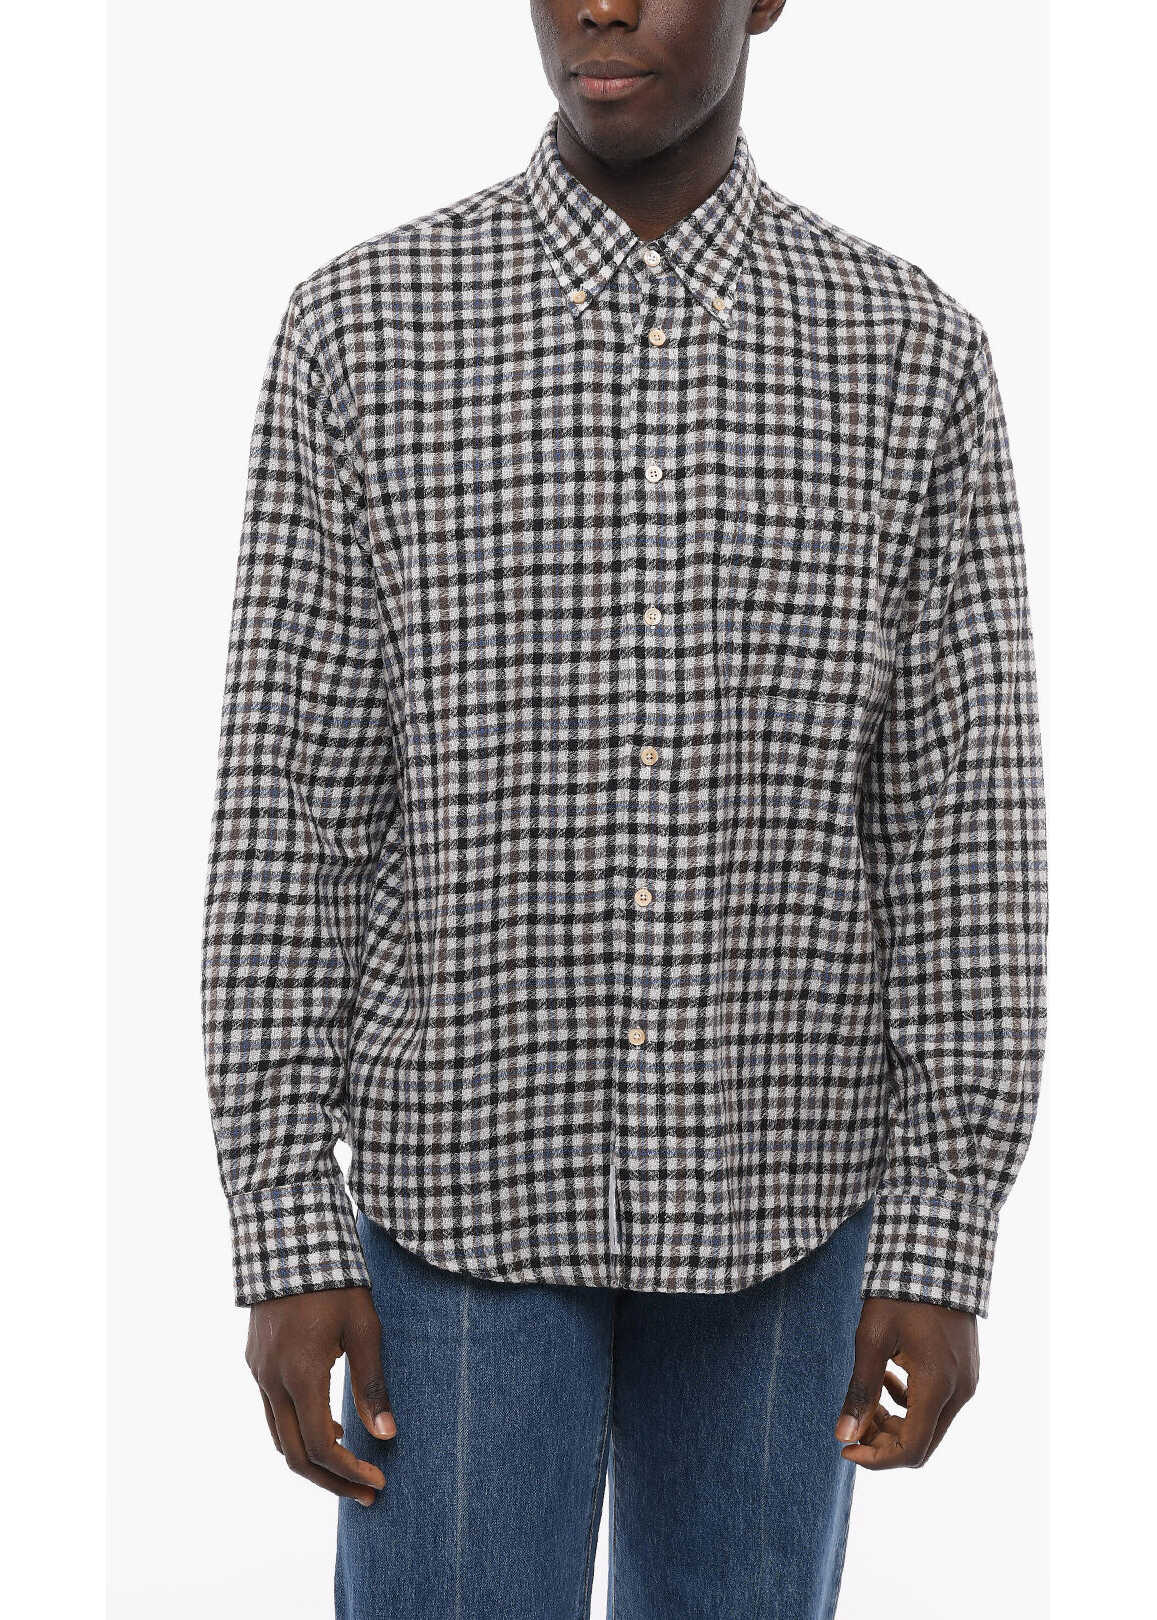 4SDESIGNS 2-2 Gingham Cashmere Flannel Shirt With Button-Down Collar Gray